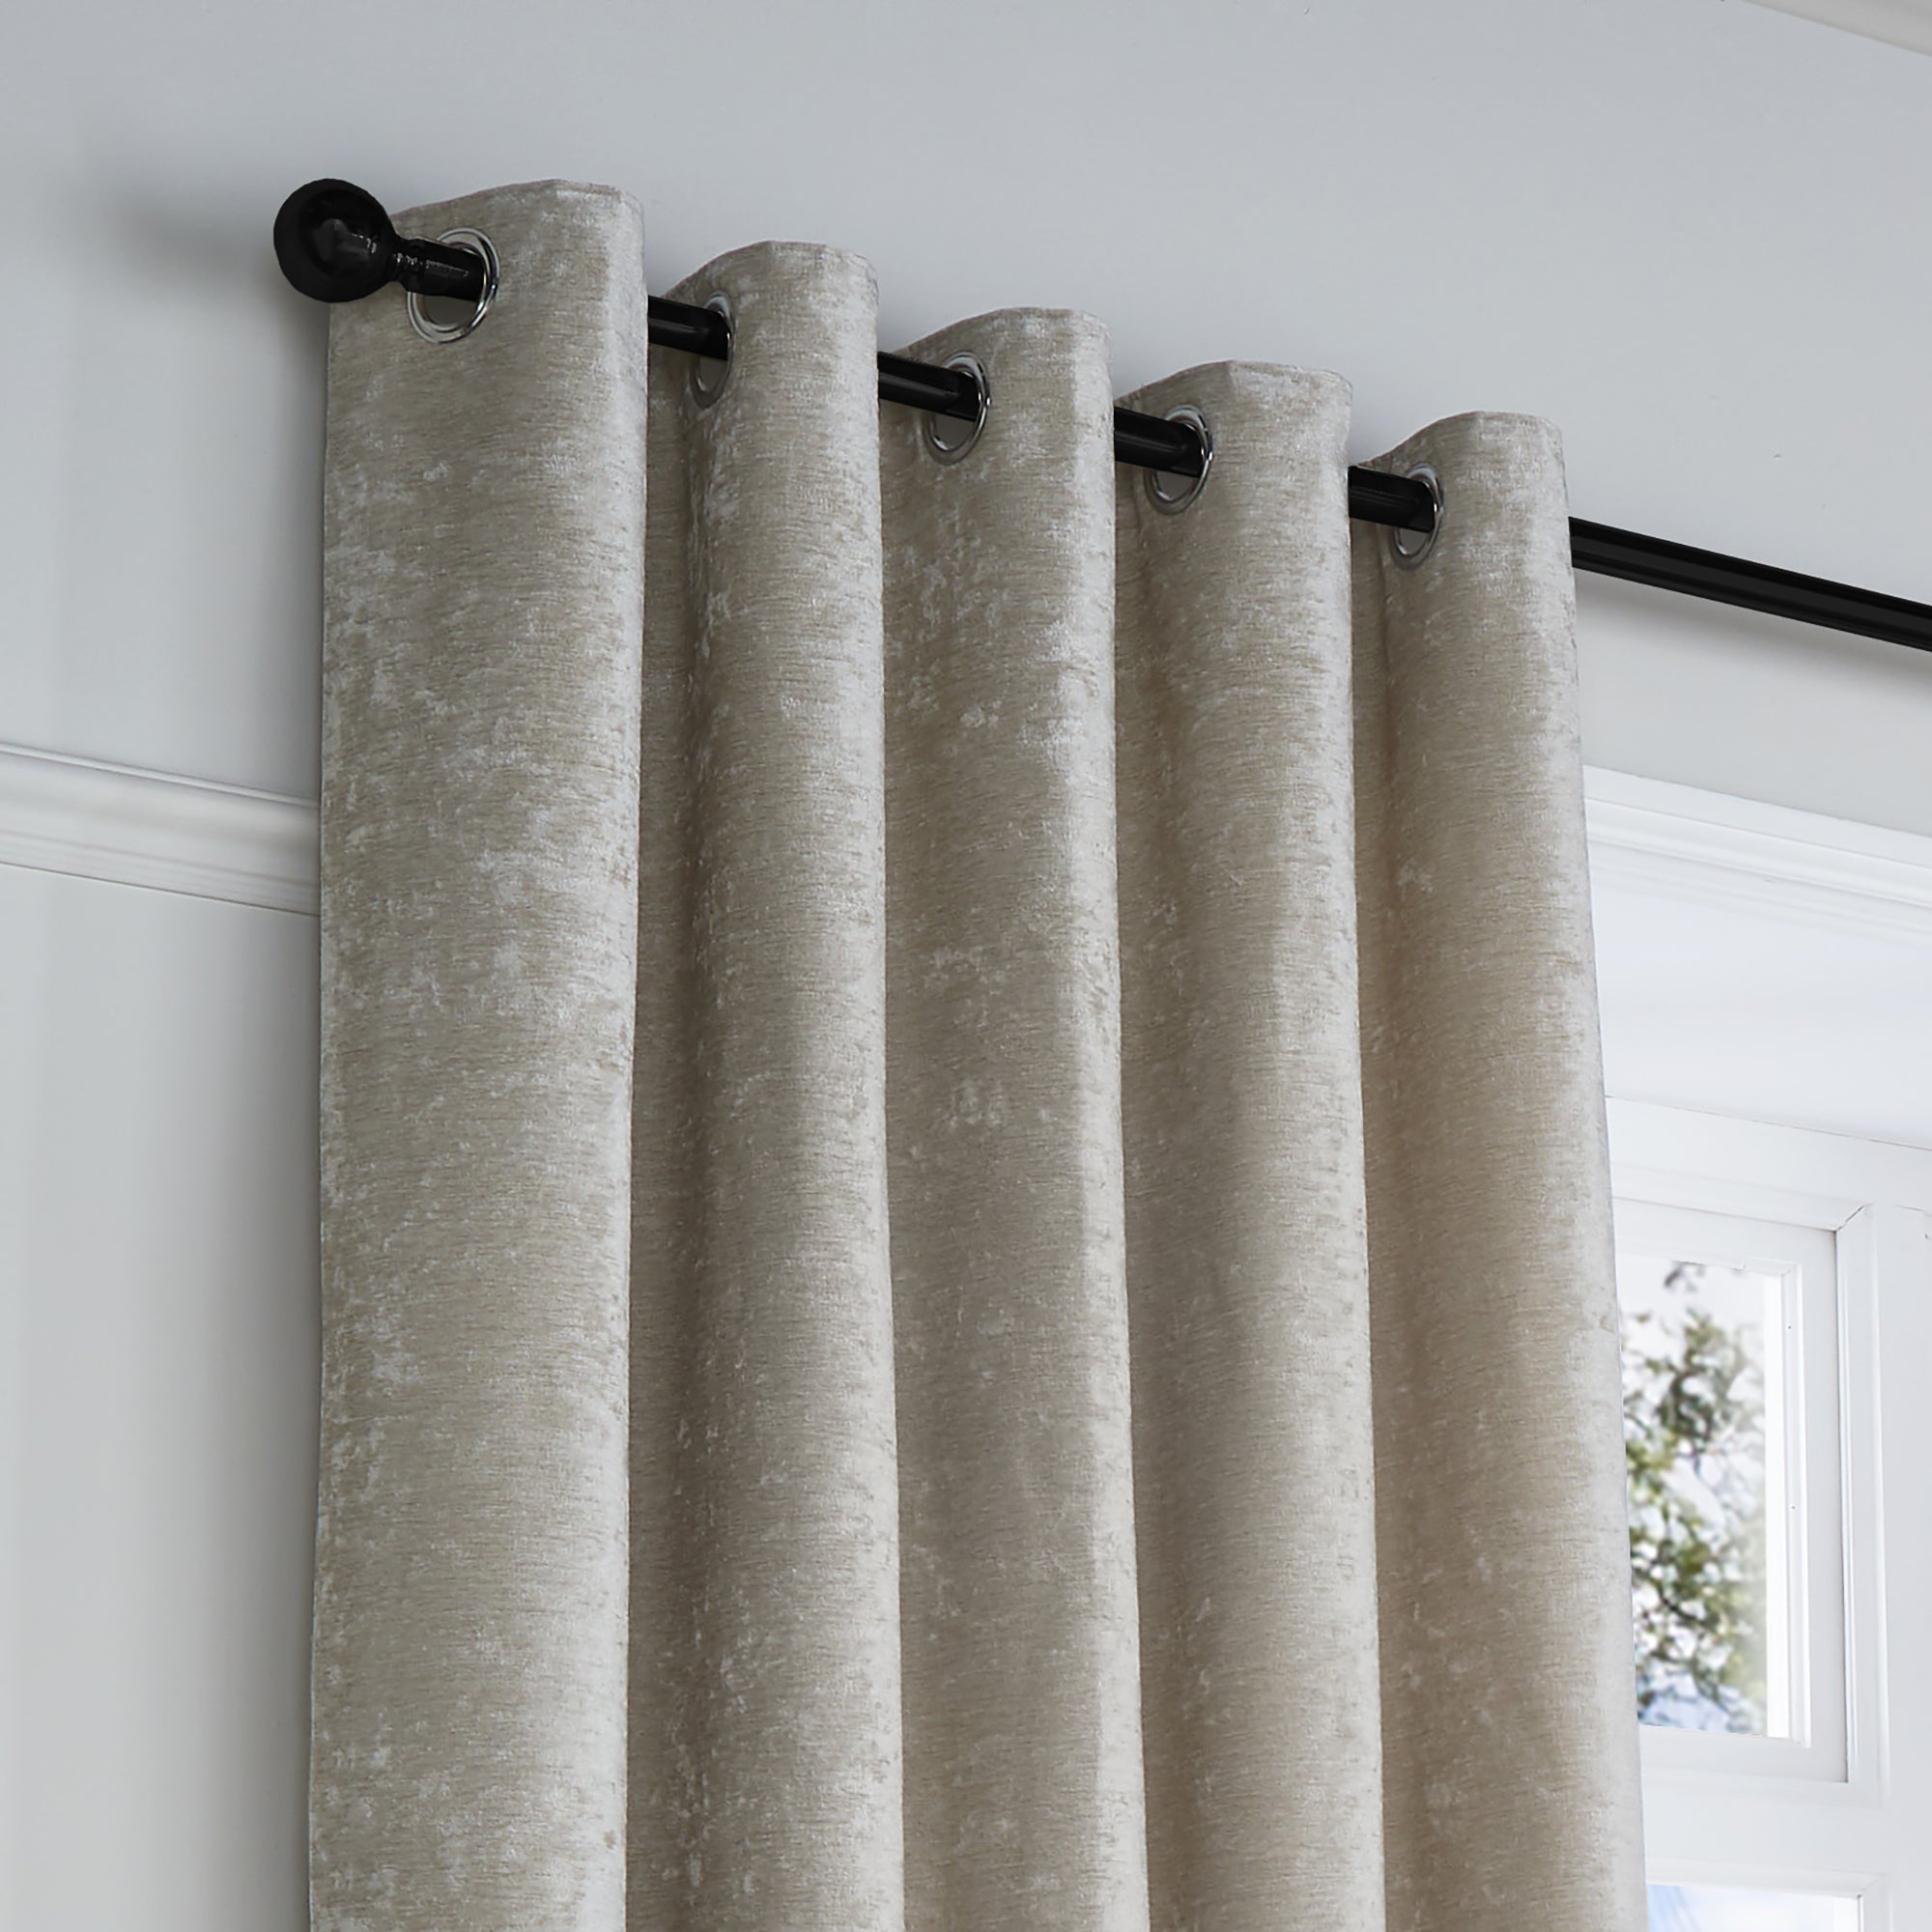 Pair of Eyelet Curtains Textured Chenille by Curtina in Natural